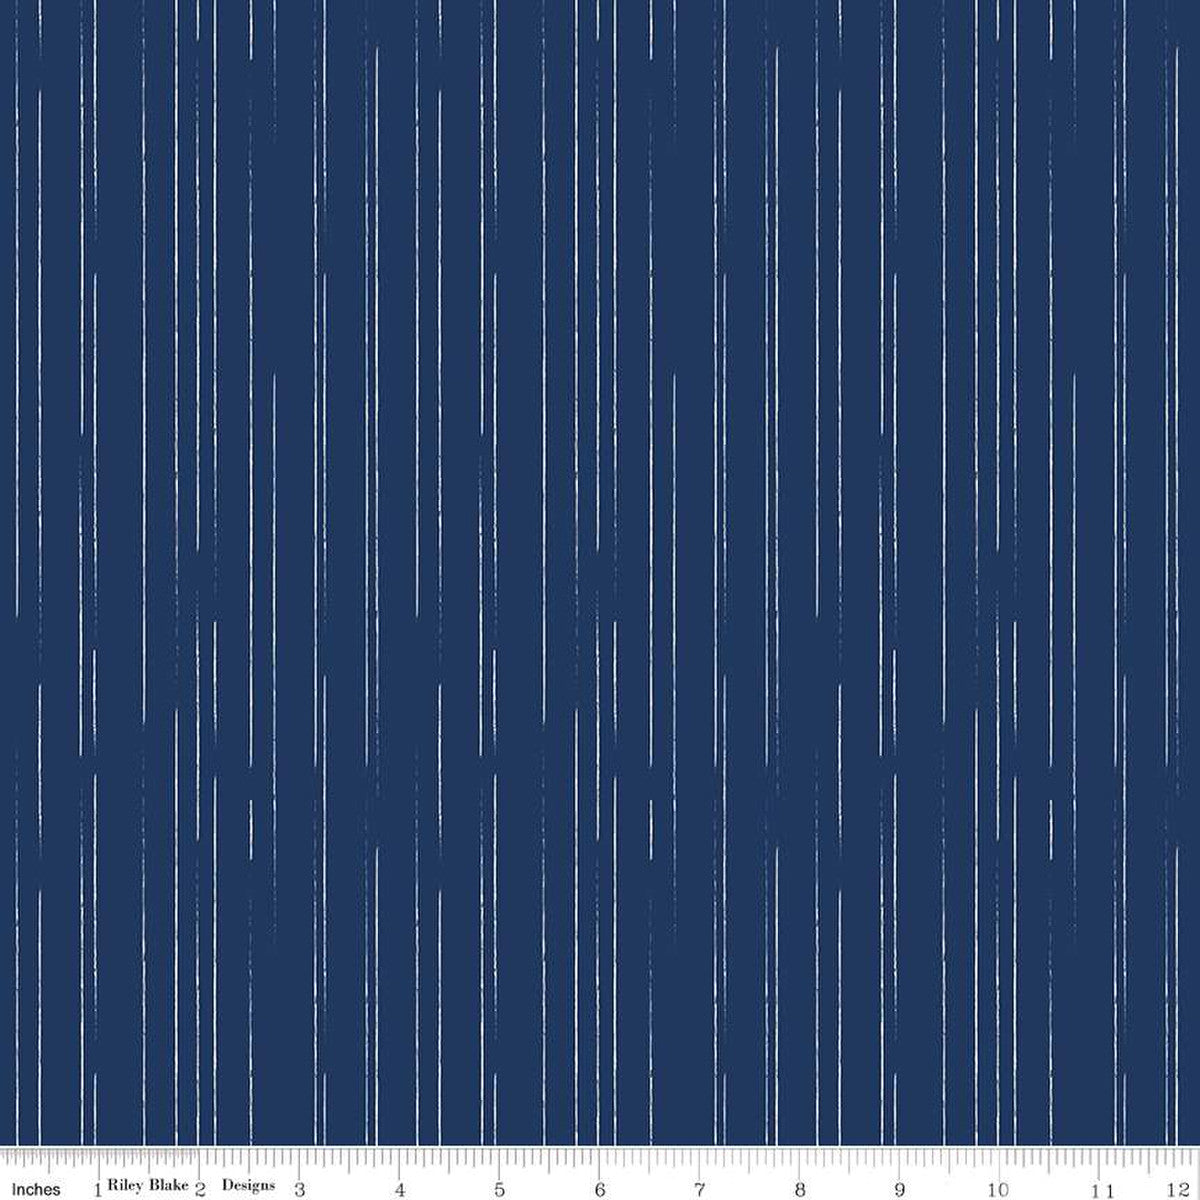 South Hill by Fran Gulick for Riley Blake designs fabric soft white irregular interrupted skinny stripes on navy background quilt weight fabric for quilting sewing garments clothing 